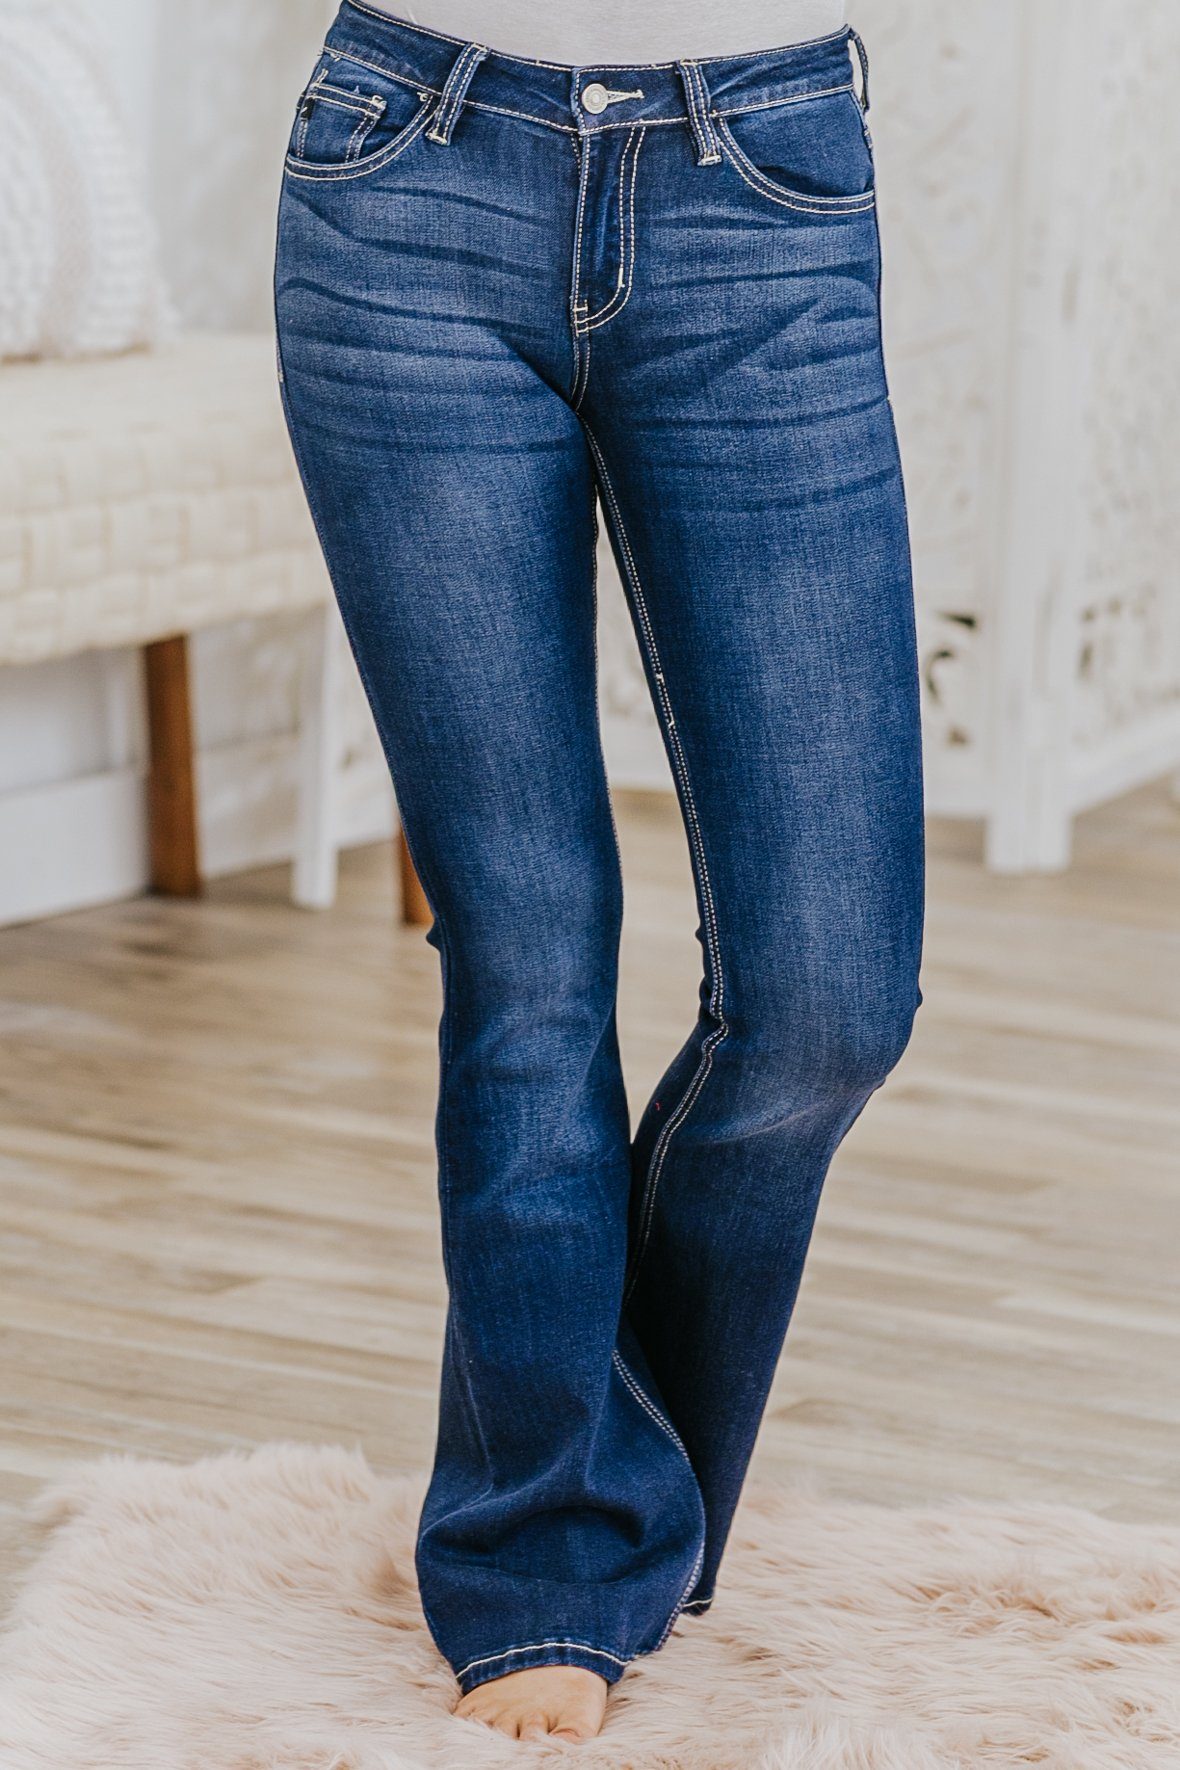 Kylee Kan Can Mid Rise Dark Wash Flare Jeans Filly Flair